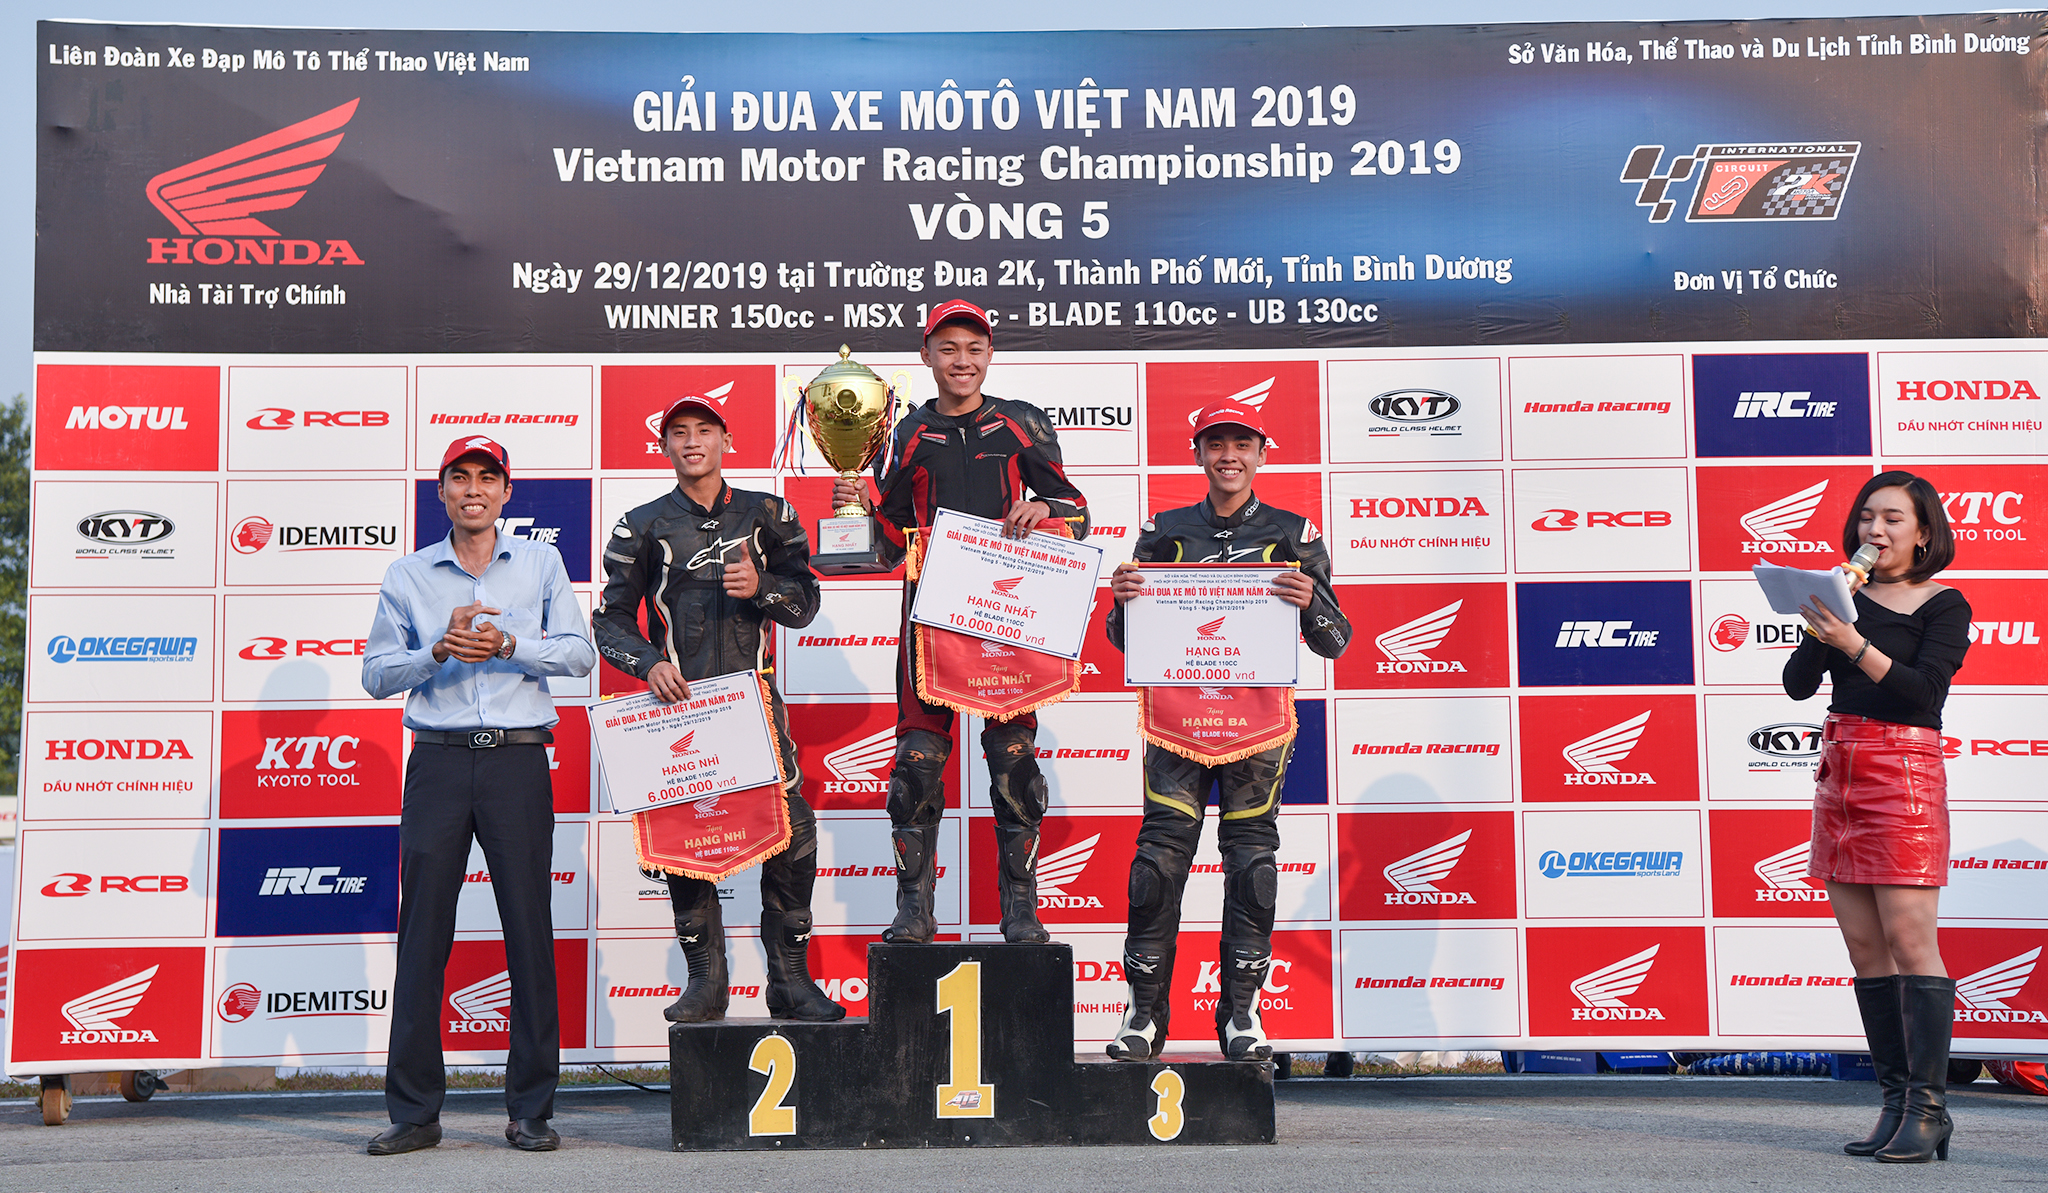 VMRC 2019 stage 5: Surprises, drama and the first champion revealed dsc-3926-copy.jpg